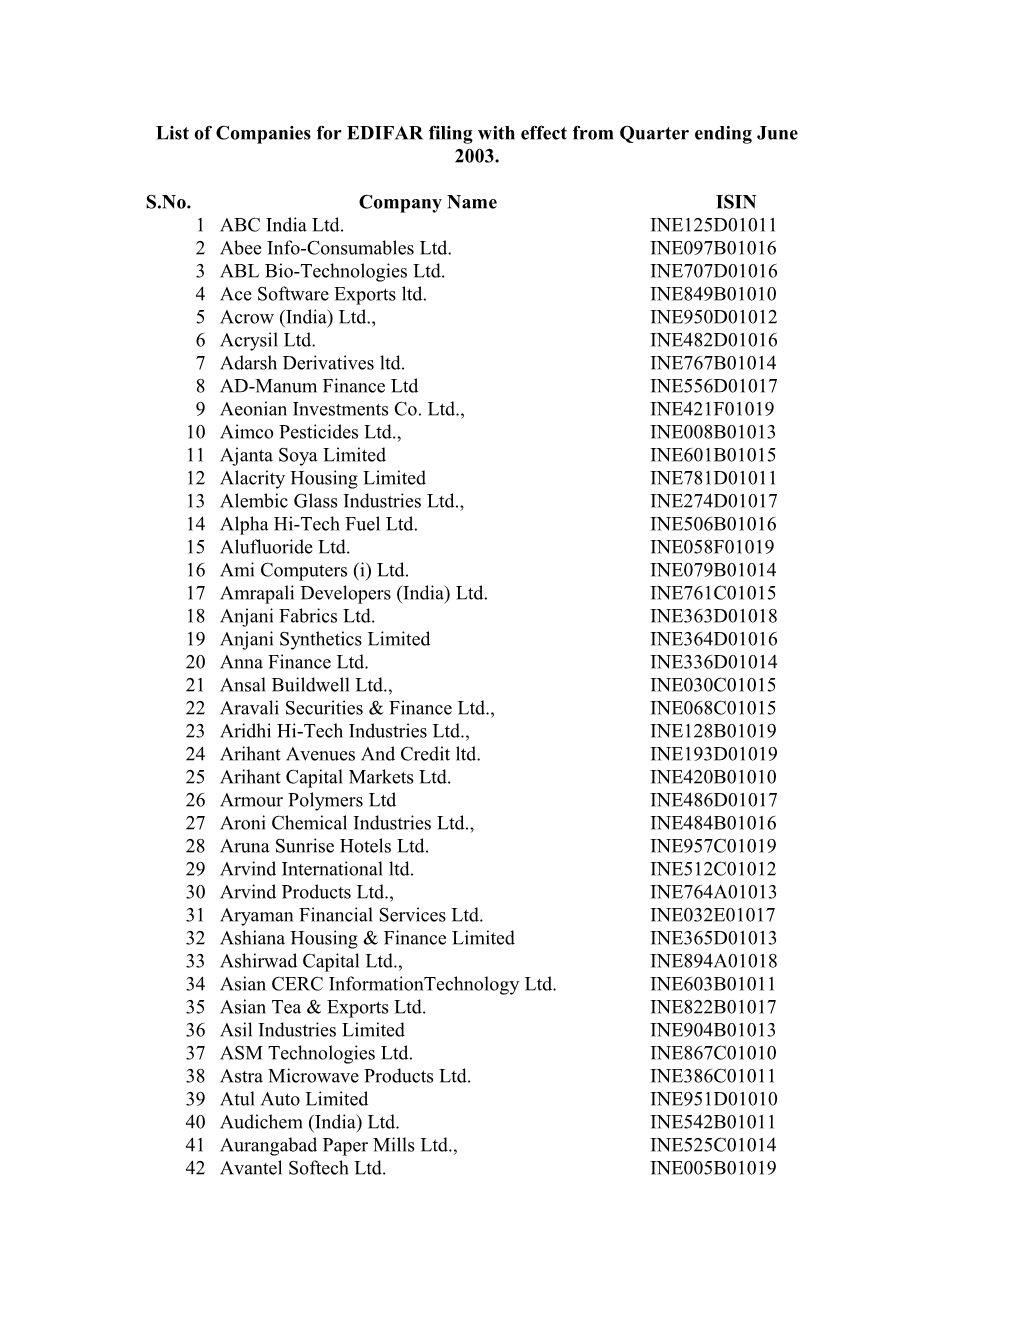 List of Companies for EDIFAR Filing with Effect from Quarter Ending June 2003